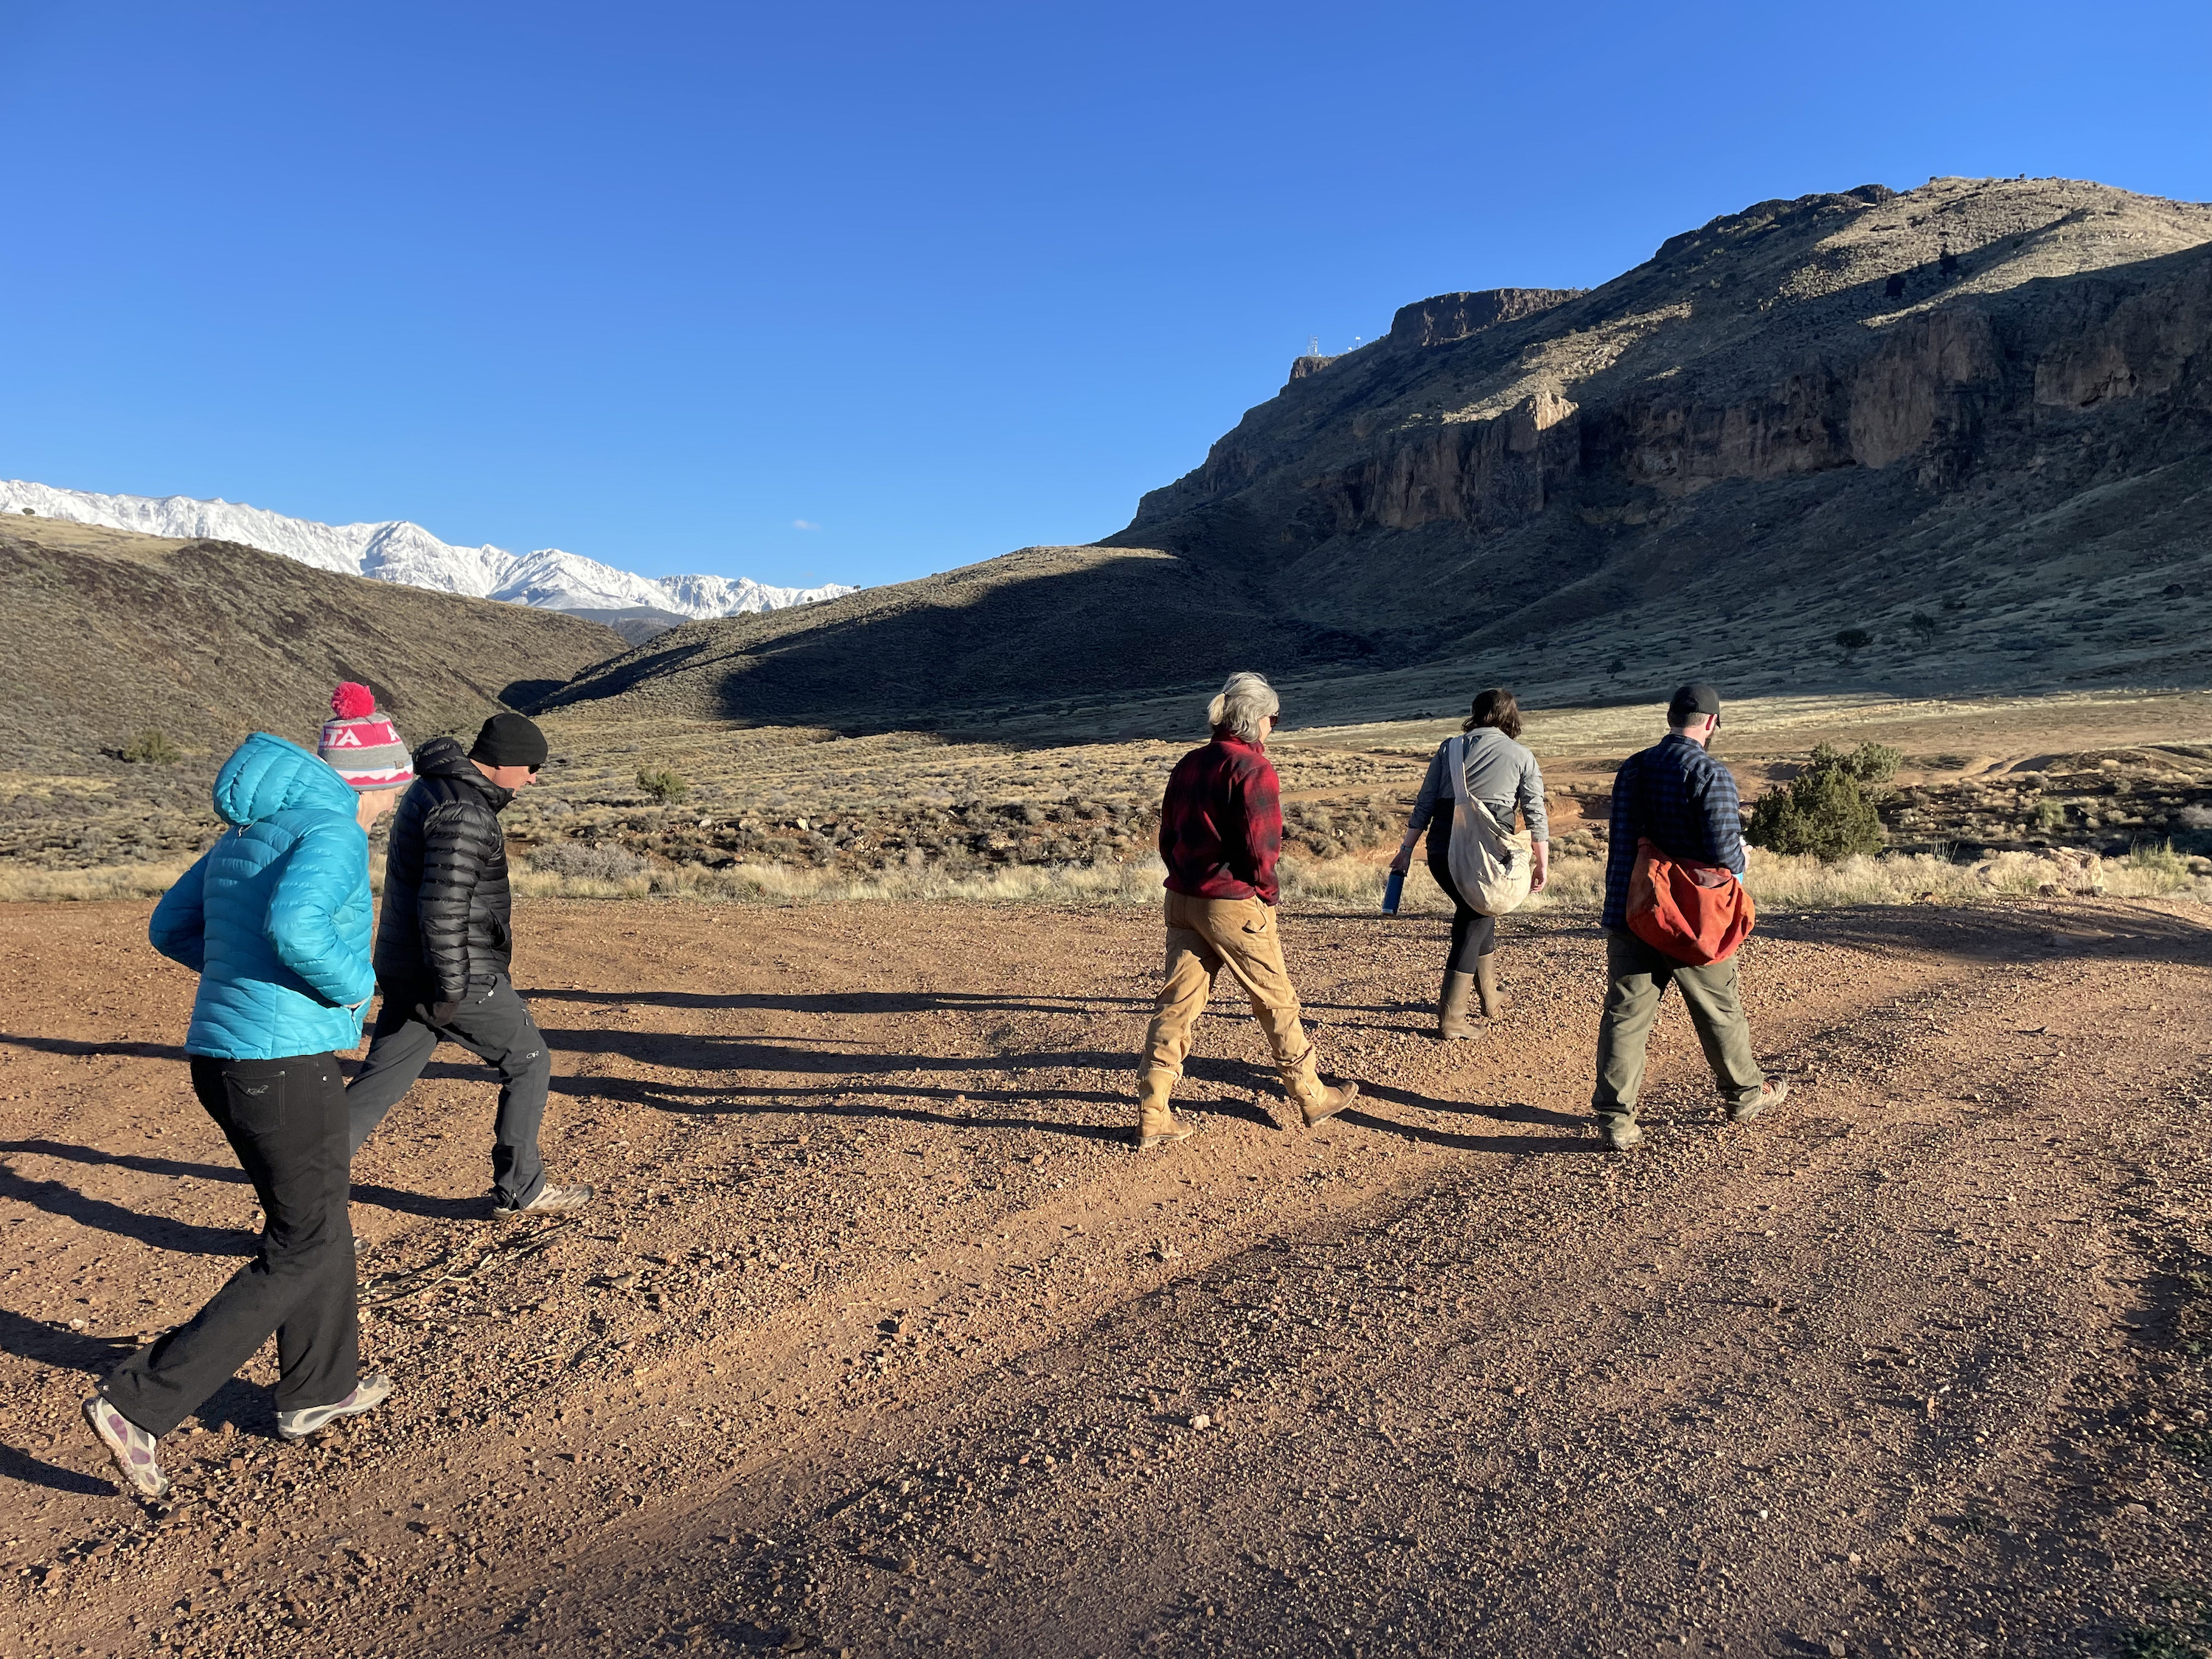 Five people hike across a dusty lot surrounded by mesas and mountains.